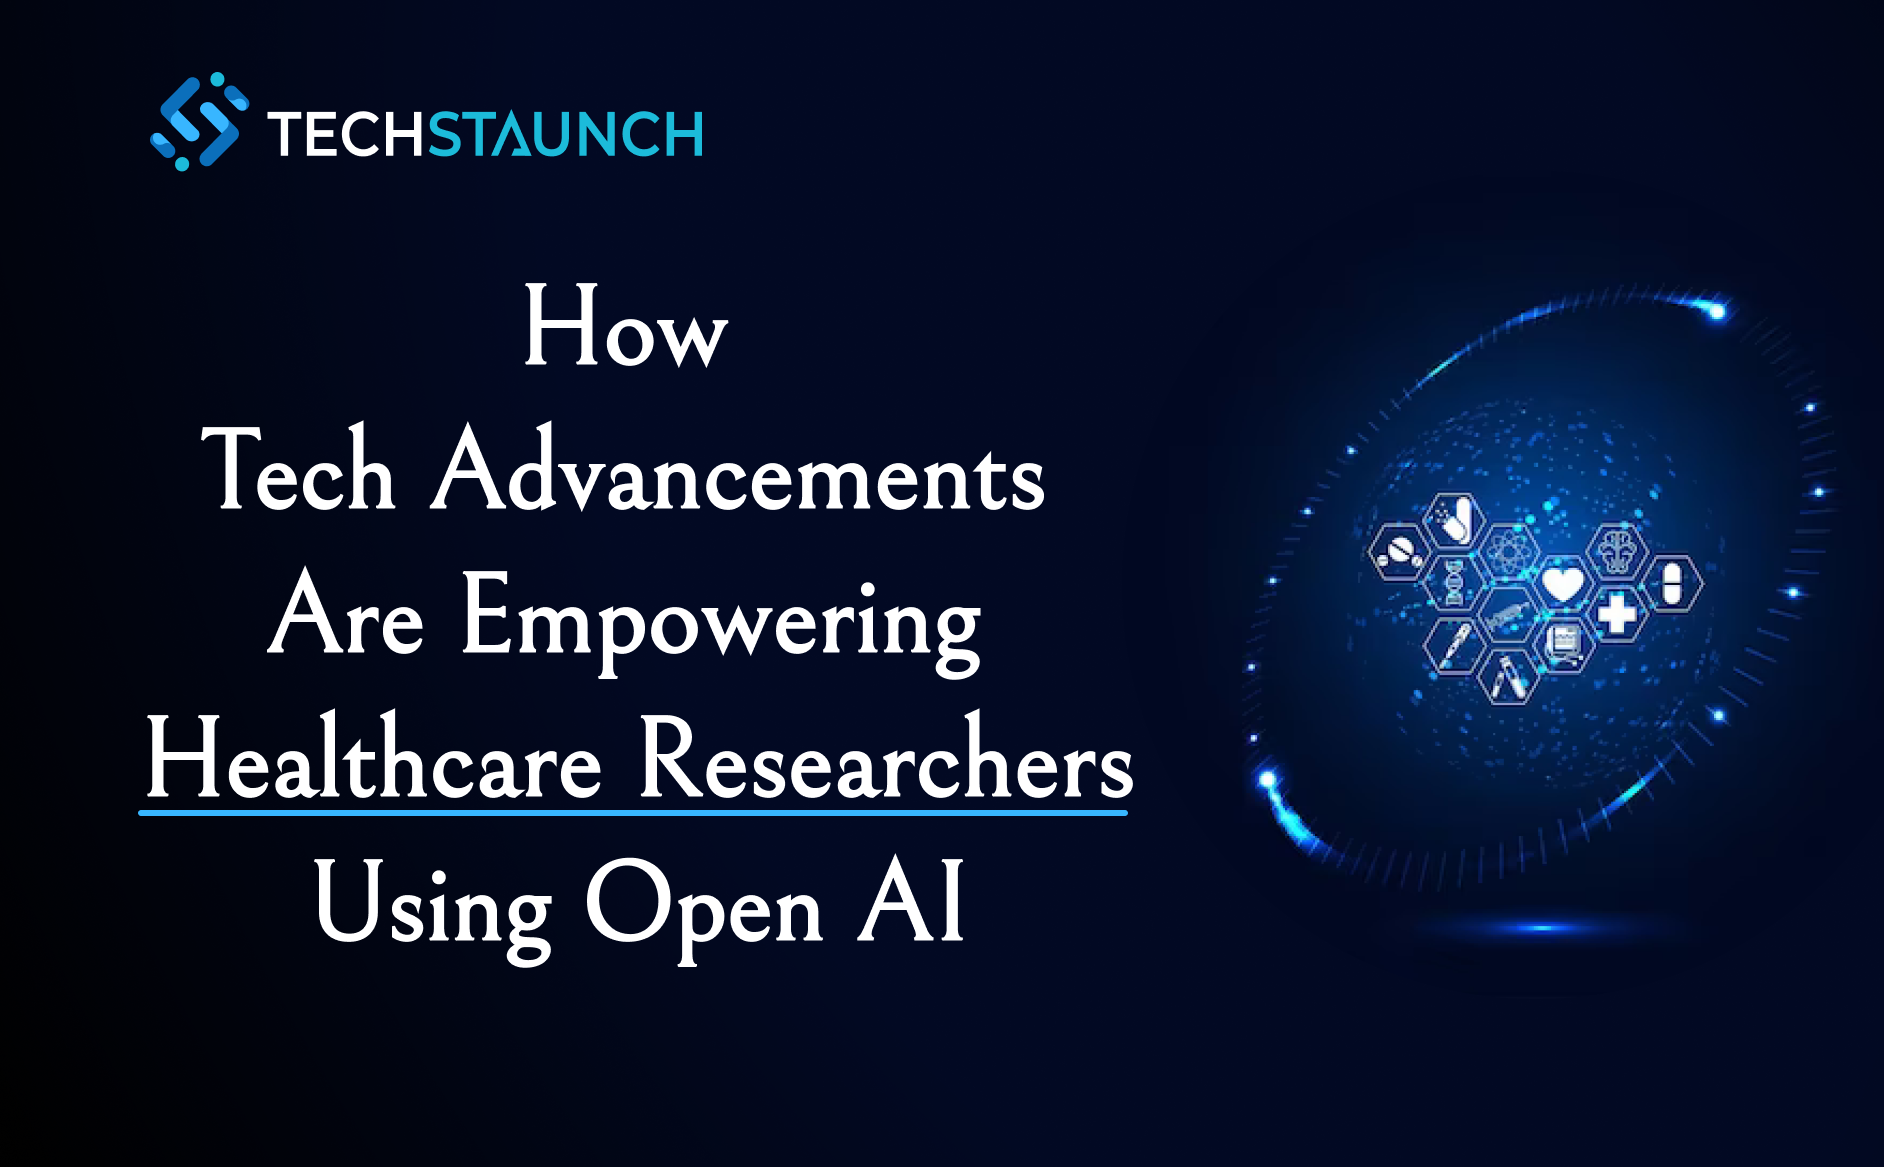 How Tech Advancements are Empowering Healthcare Researchers using Open AI